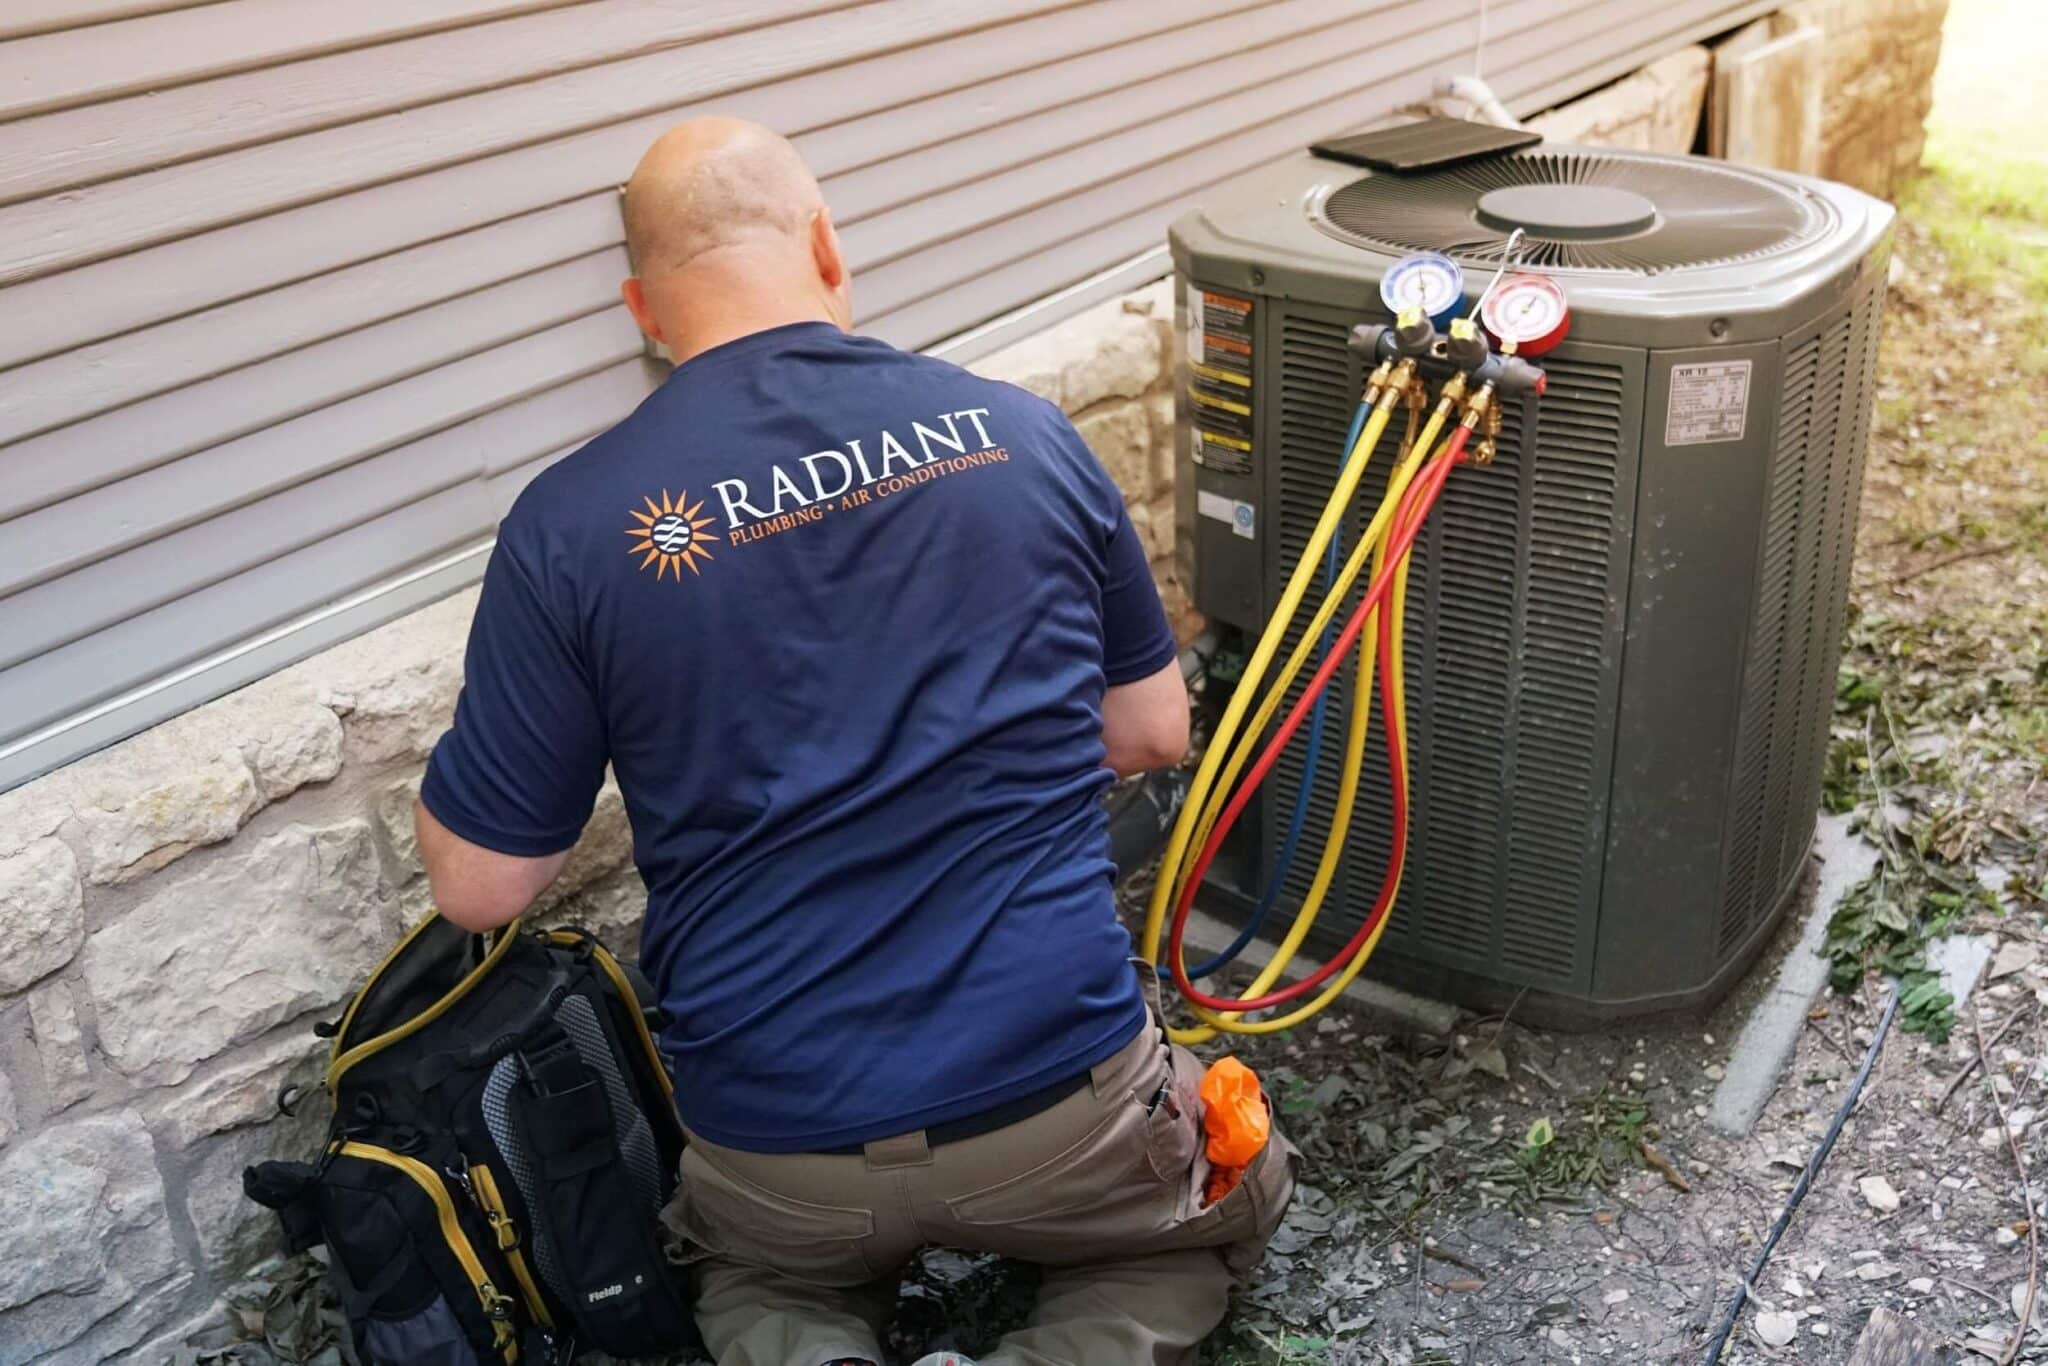 Radiant Technician working on an outdoor A/C Unit